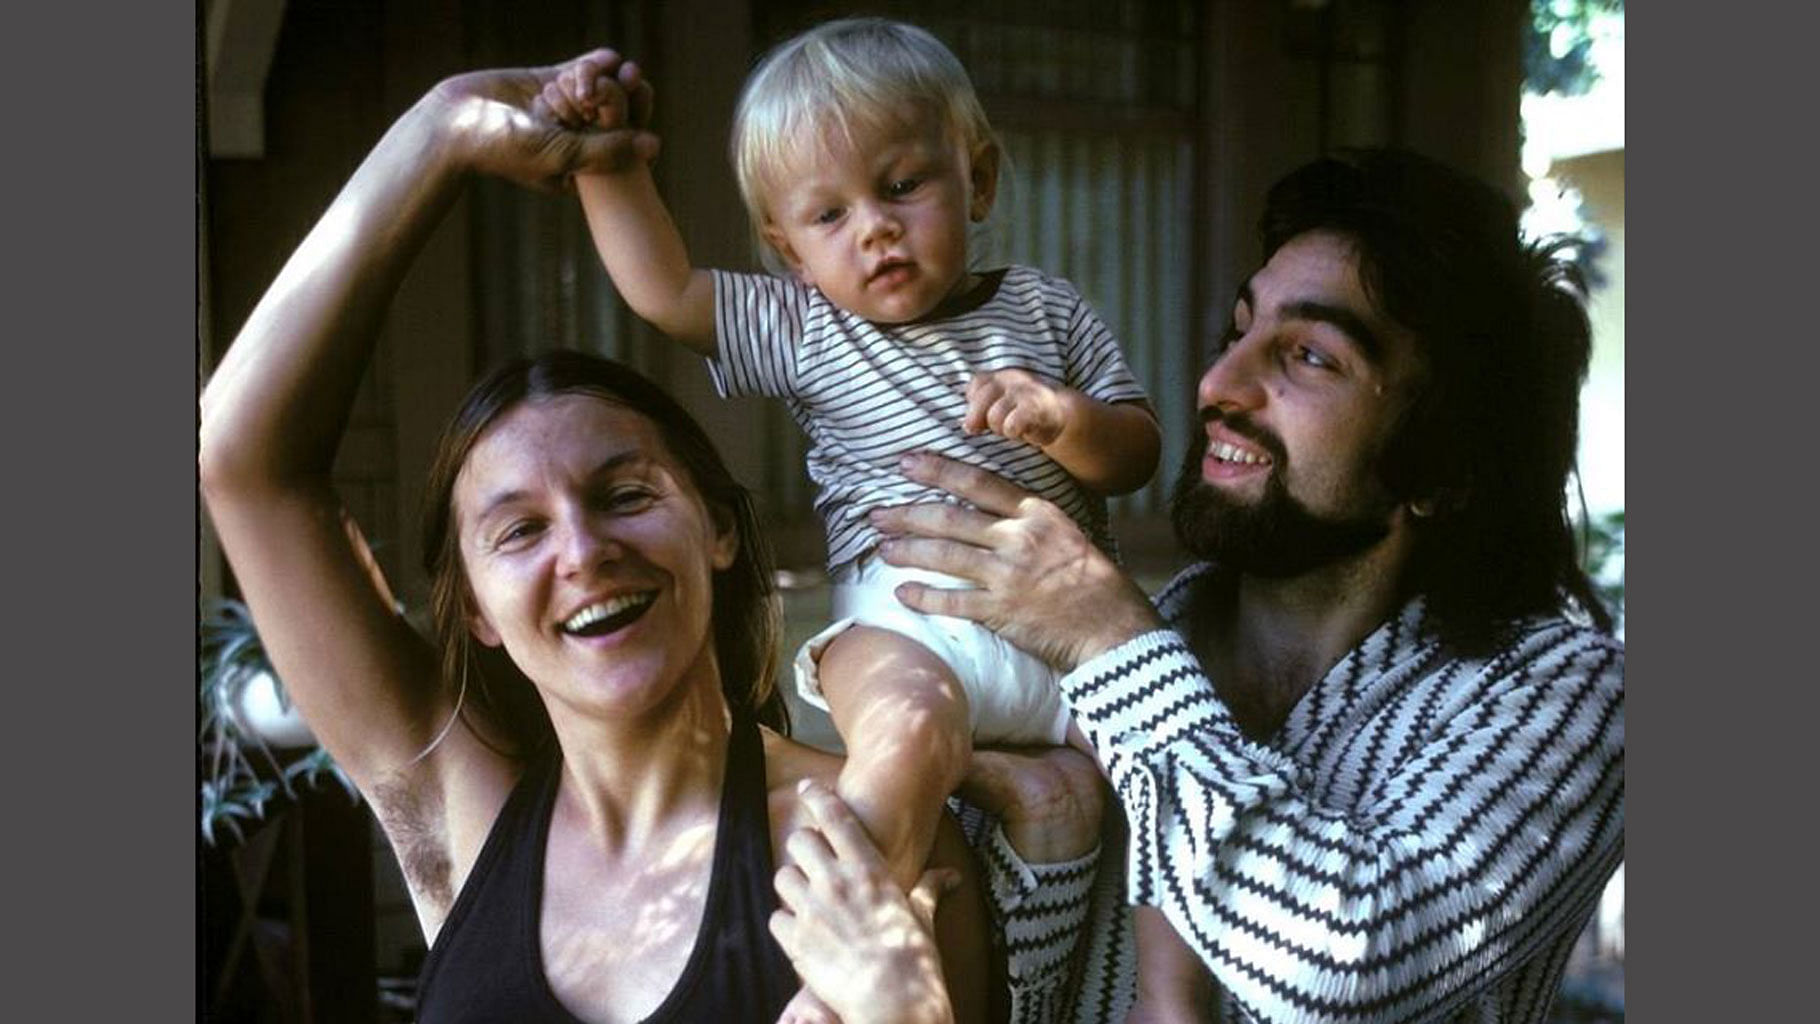 An old photograph of Leonardo DiCaprio with his parents shared by ‘History In Pictures’ on their Facebook page (Photo courtesy: Facebook)